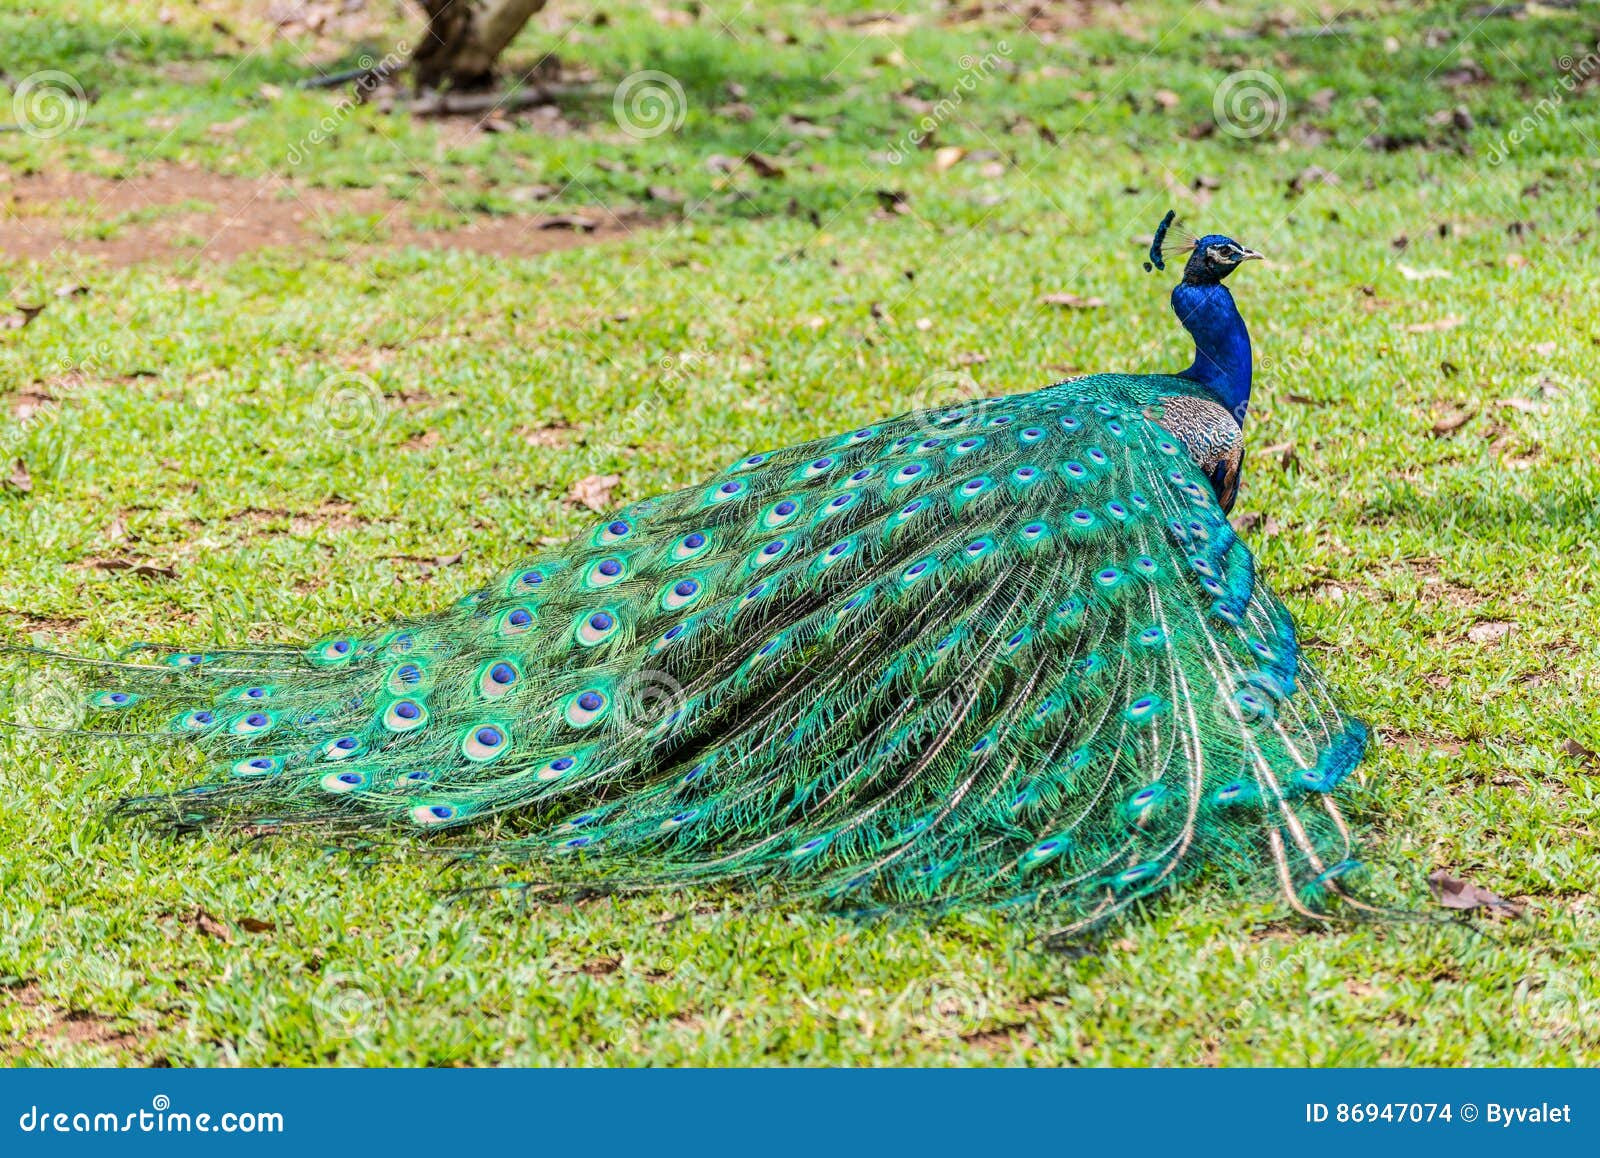 male indian peacock pavo cristatus with folded tail